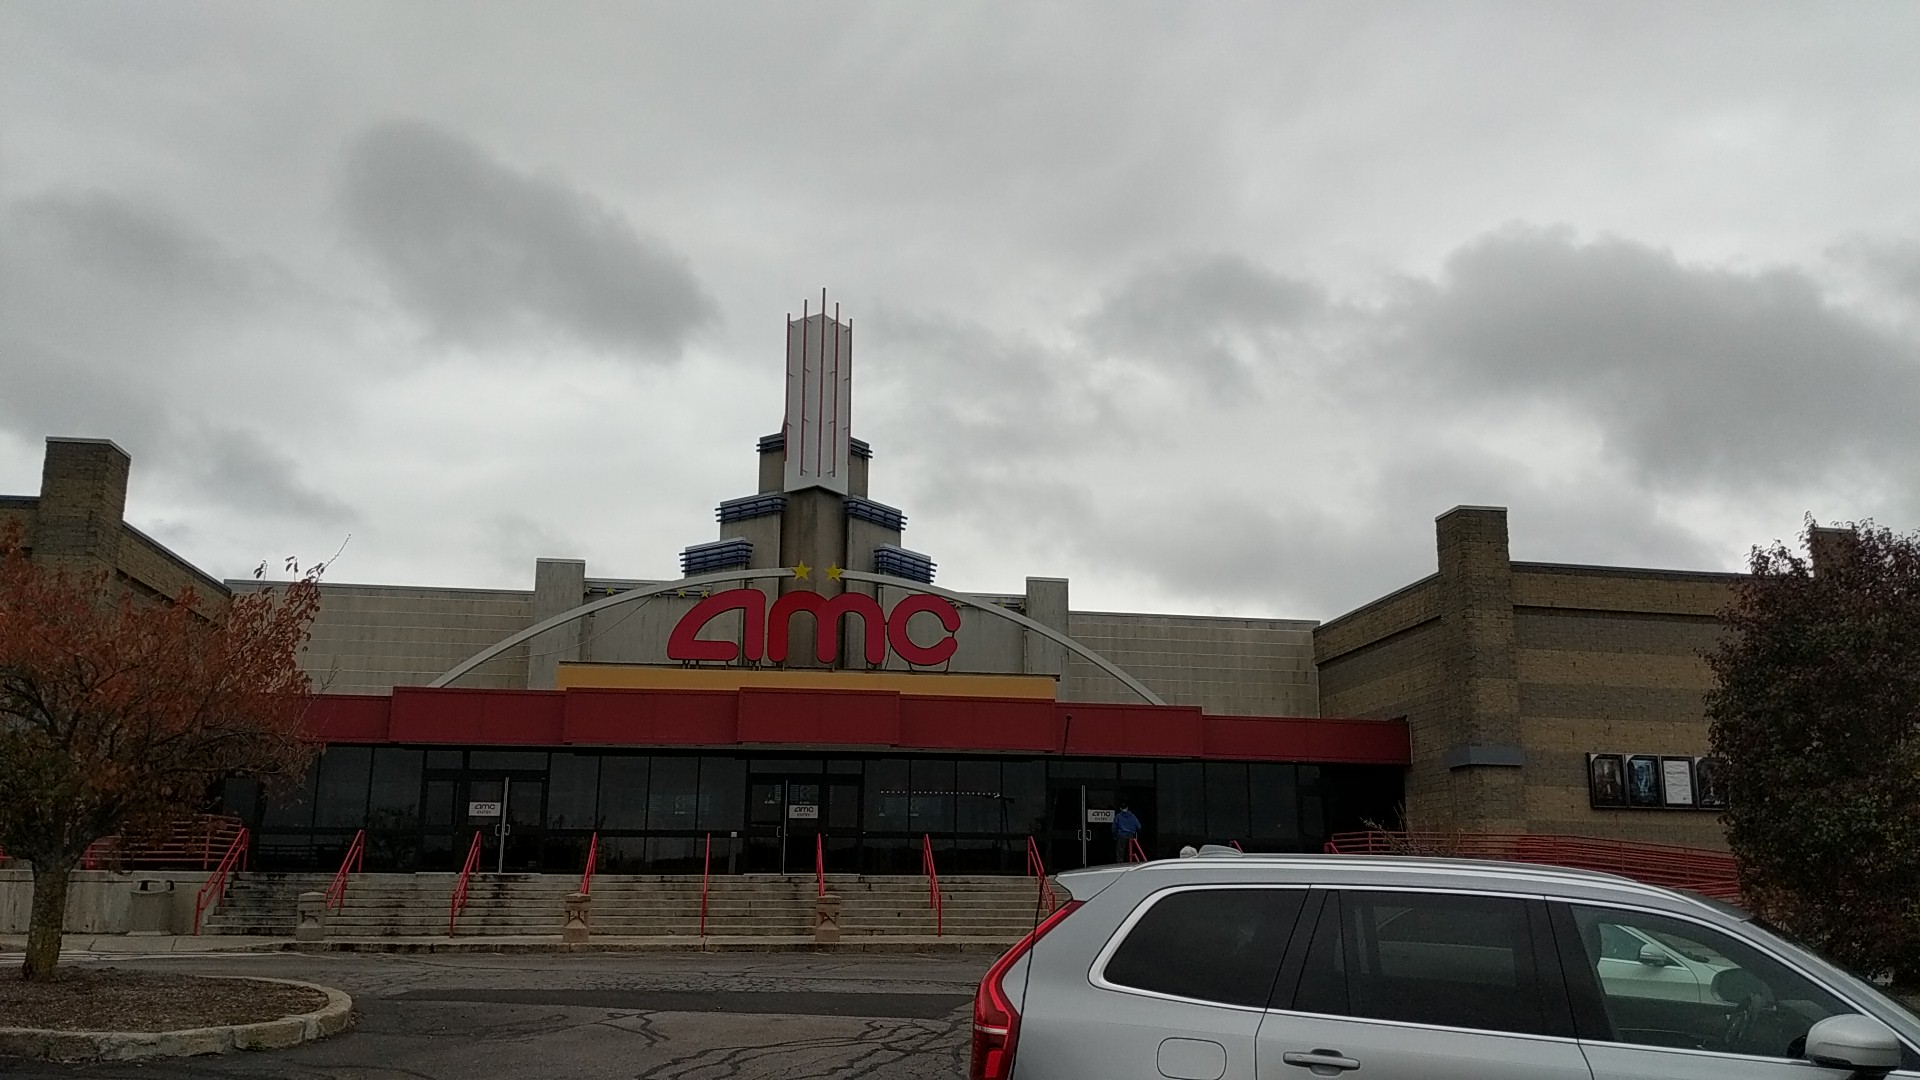 https://static.wikia.nocookie.net/malls/images/9/94/Exterior_Of_An_AMC_Theatres_In_Braintree%2C_Massachussetts%2C_Which_Opened_On_May_21%2C_1993.jpg/revision/latest?cb=20190509151416